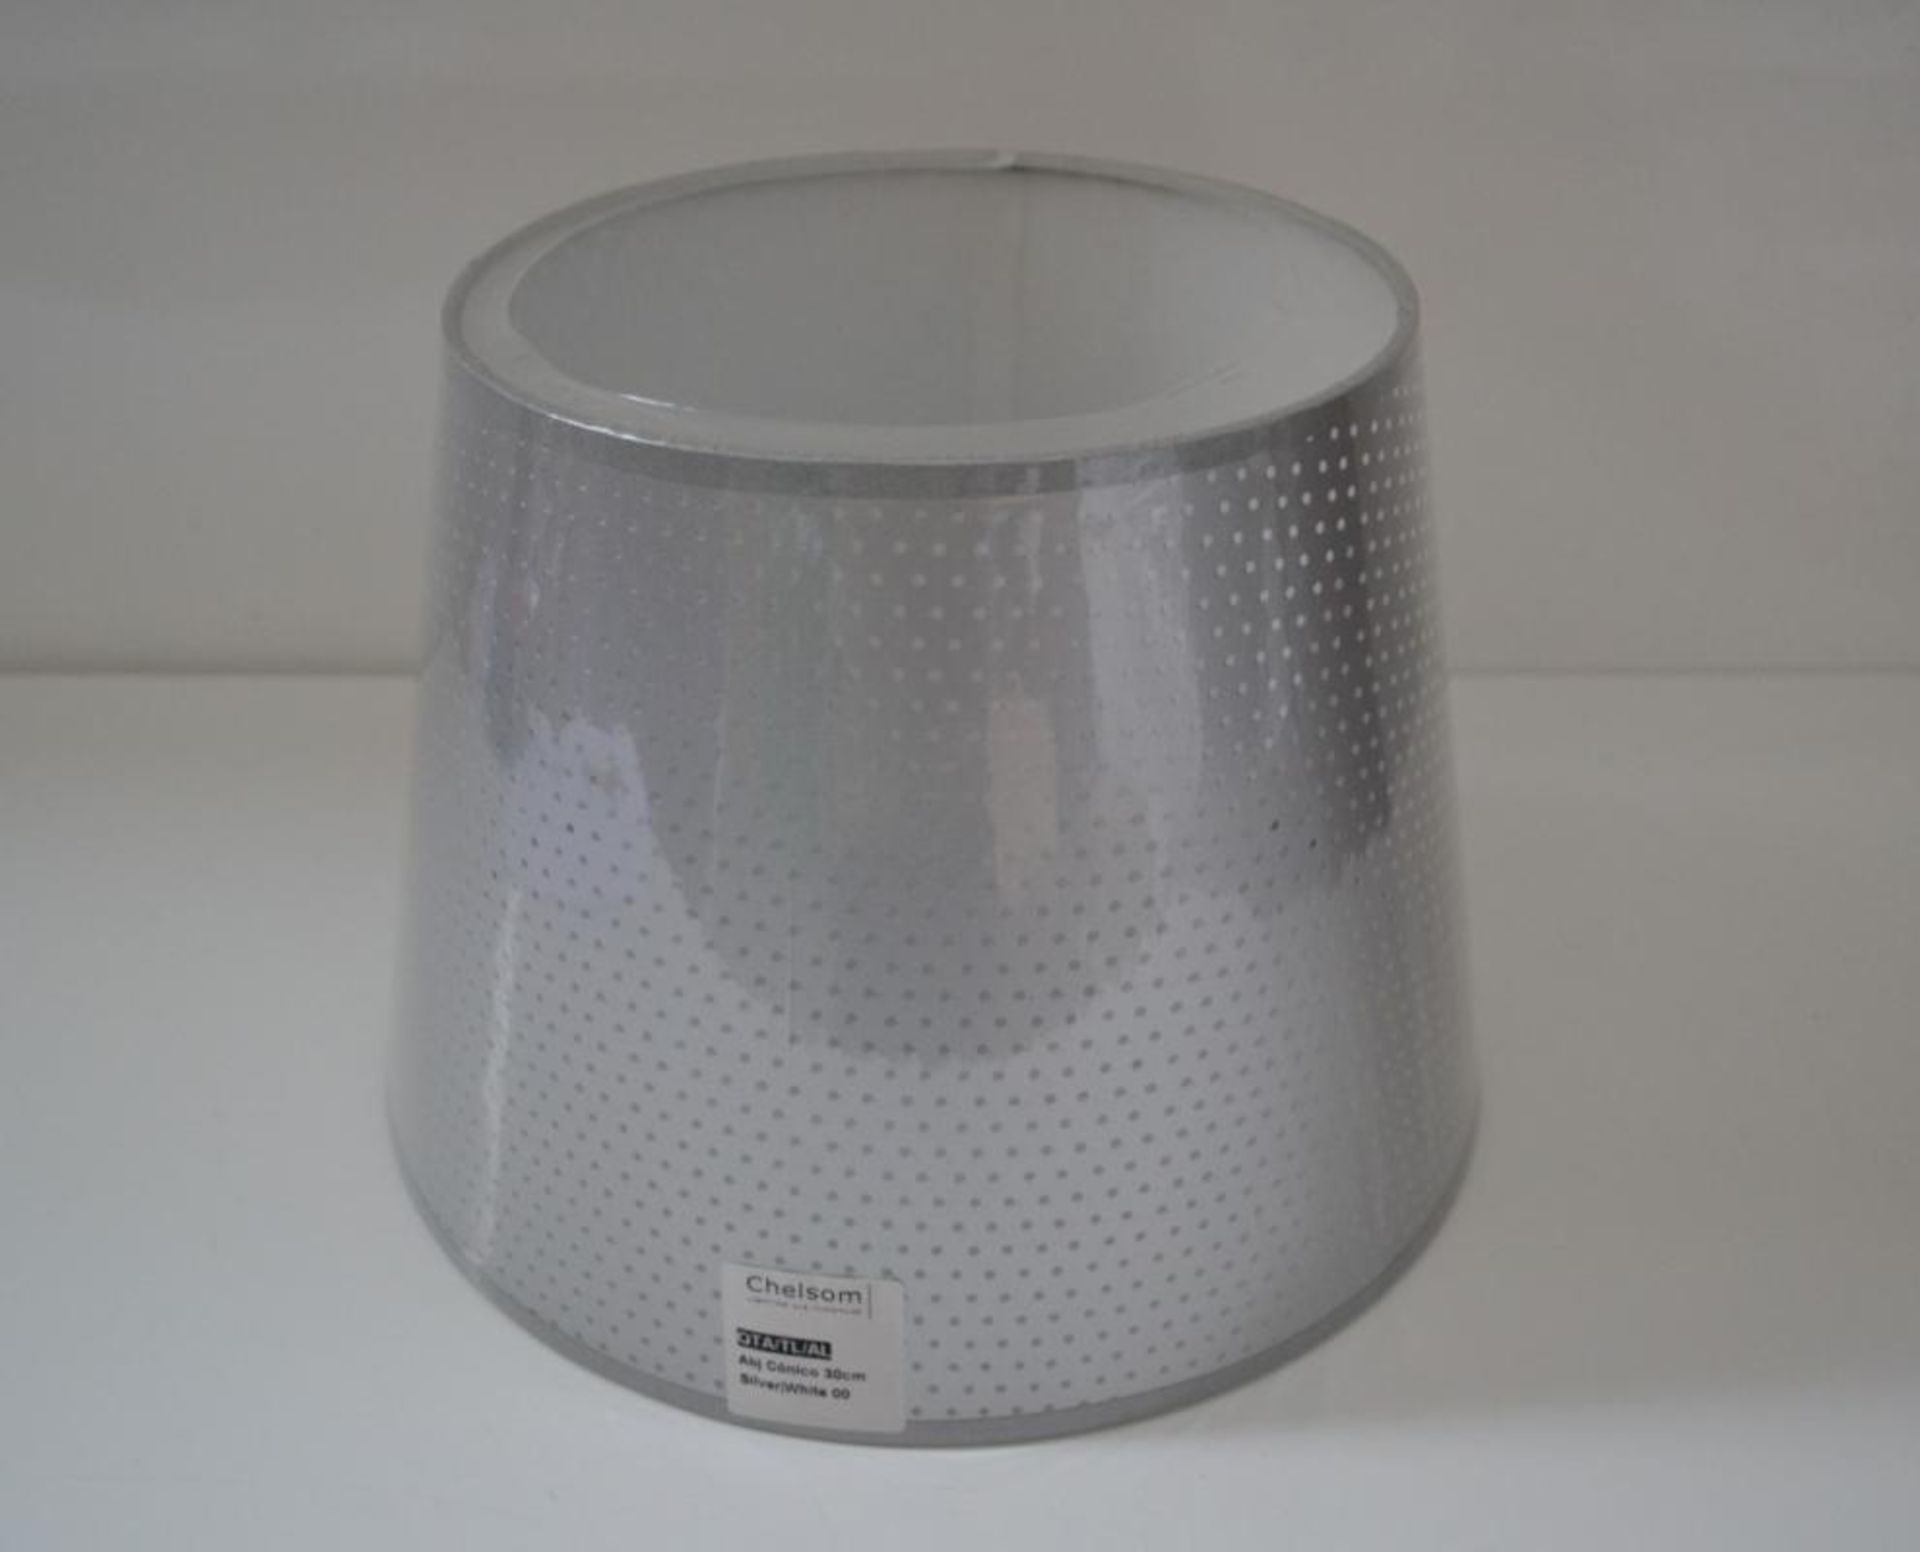 2 x Chelsom Lamp Shade in Silver White 30cm (QTA/TL/AL) - New/Unused boxed stock - CL001 - Ref: PAL3